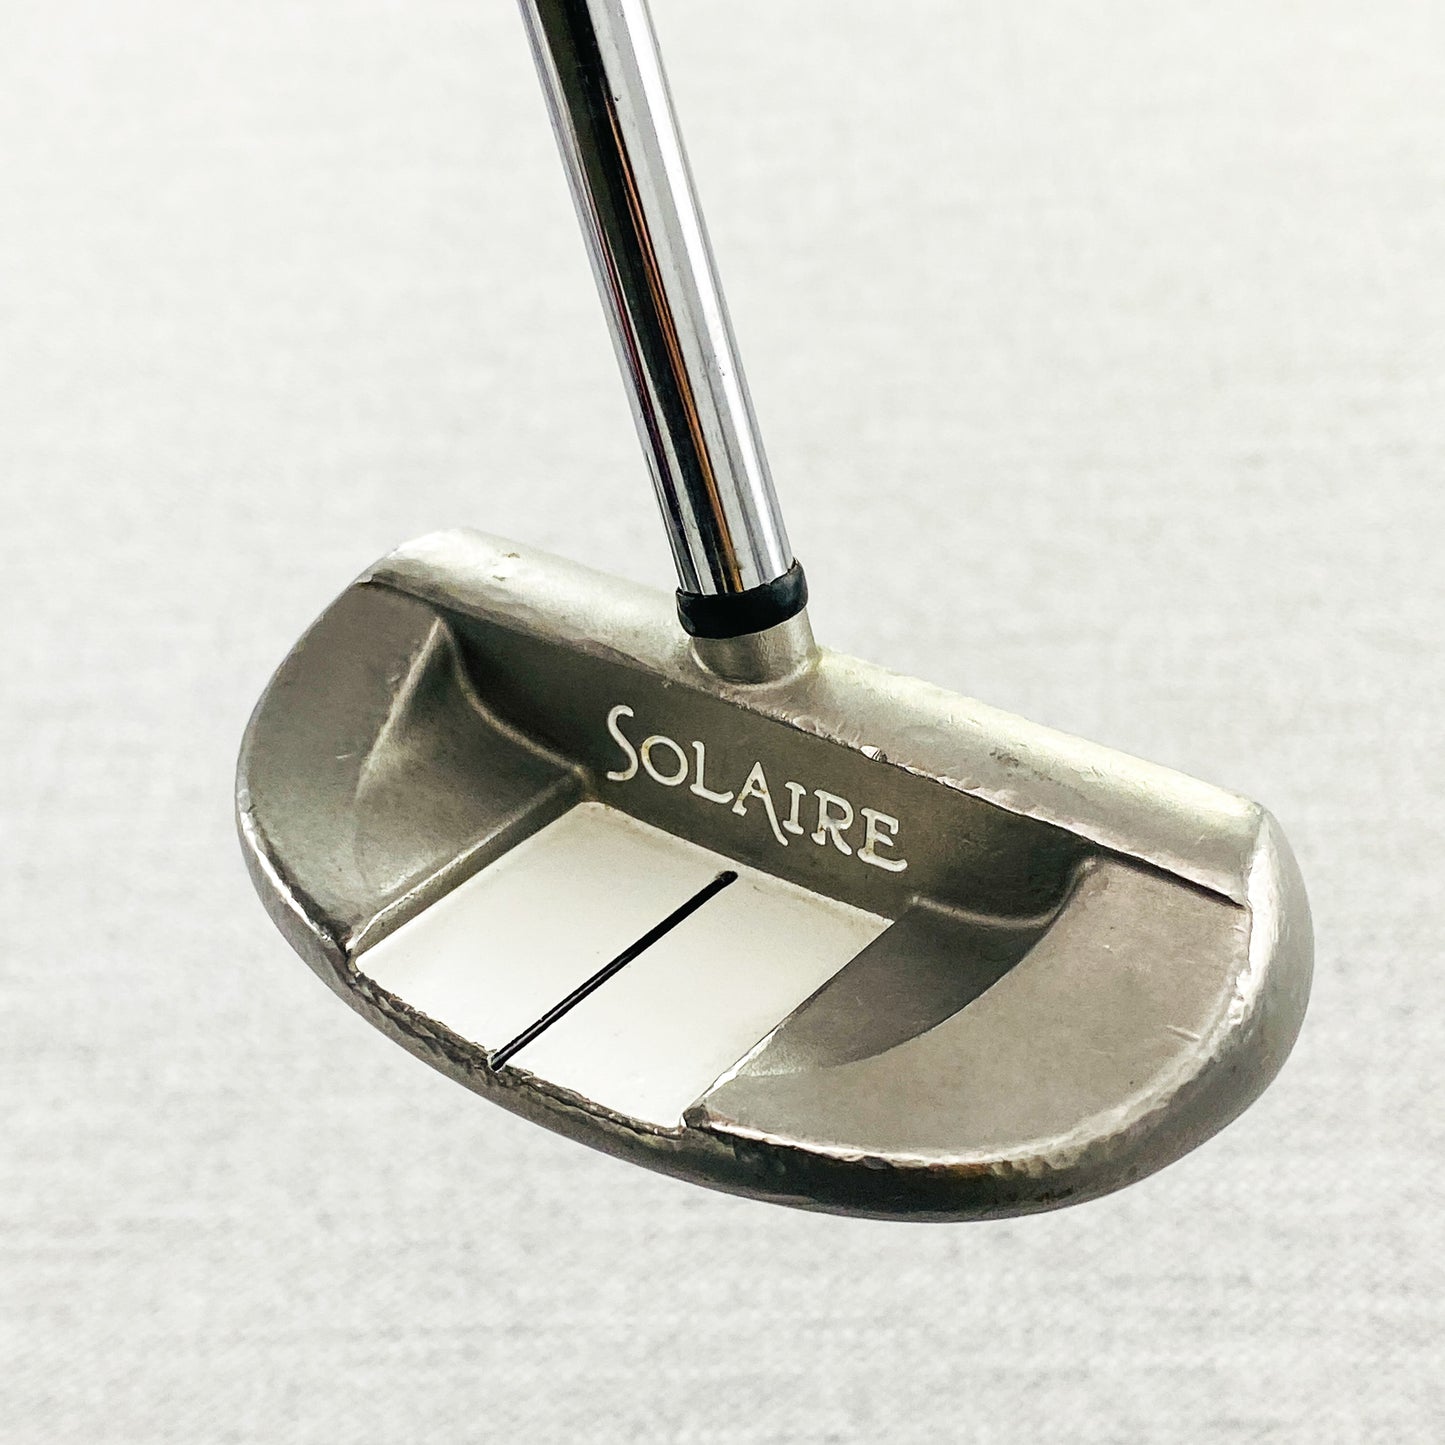 Callaway Solaire Junior Putter. 31 inch - Good Condition # 13158